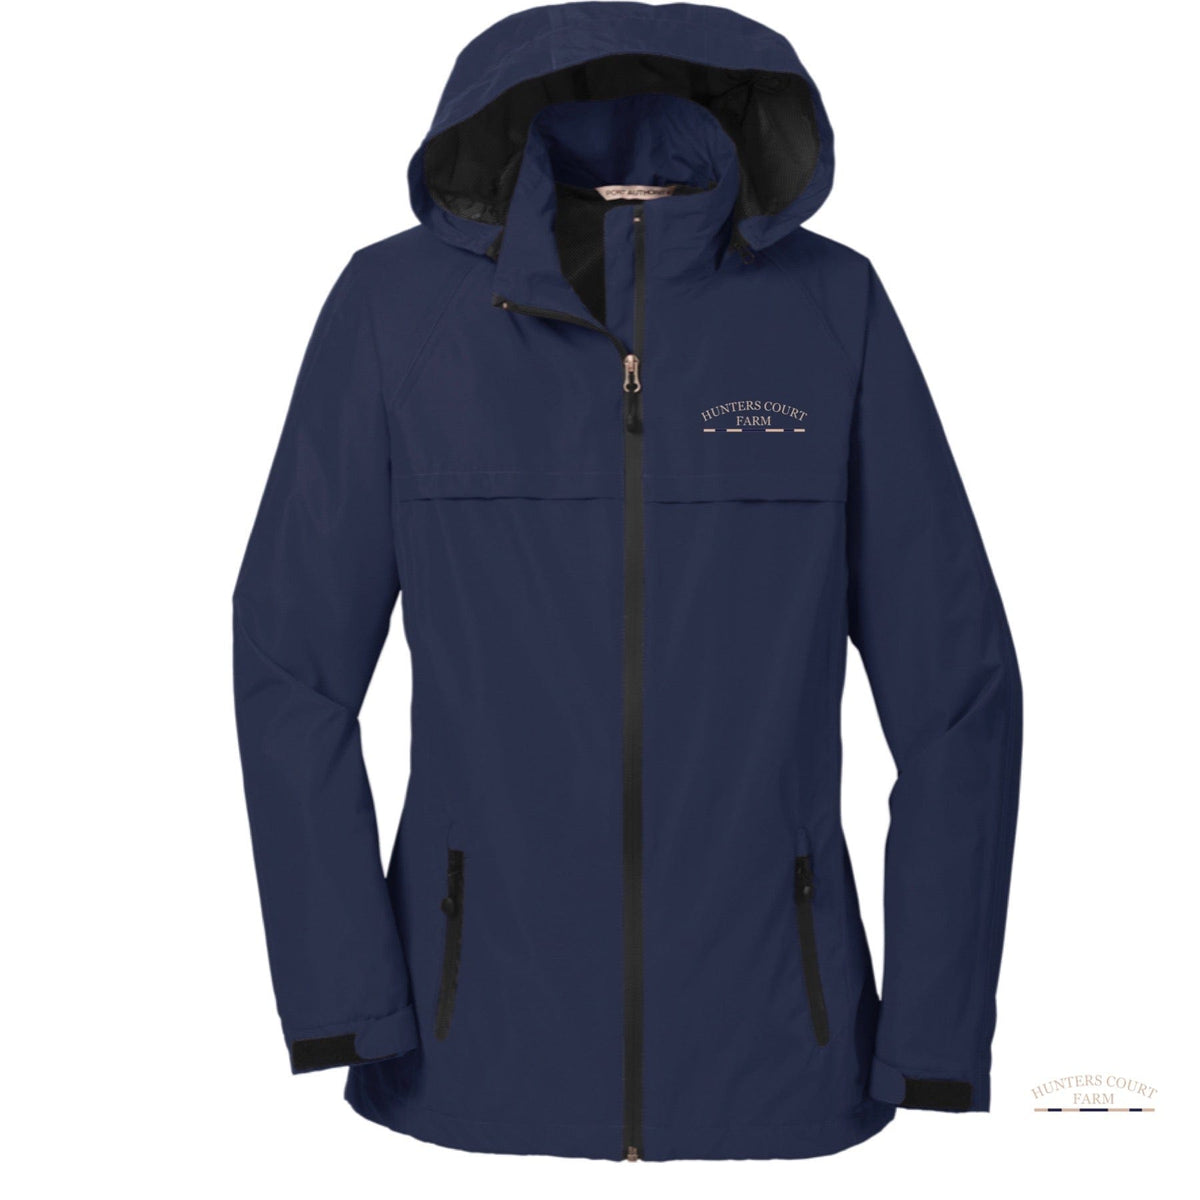 Equestrian Team Apparel Hunters Court Farm Rain Coat equestrian team apparel online tack store mobile tack store custom farm apparel custom show stable clothing equestrian lifestyle horse show clothing riding clothes horses equestrian tack store